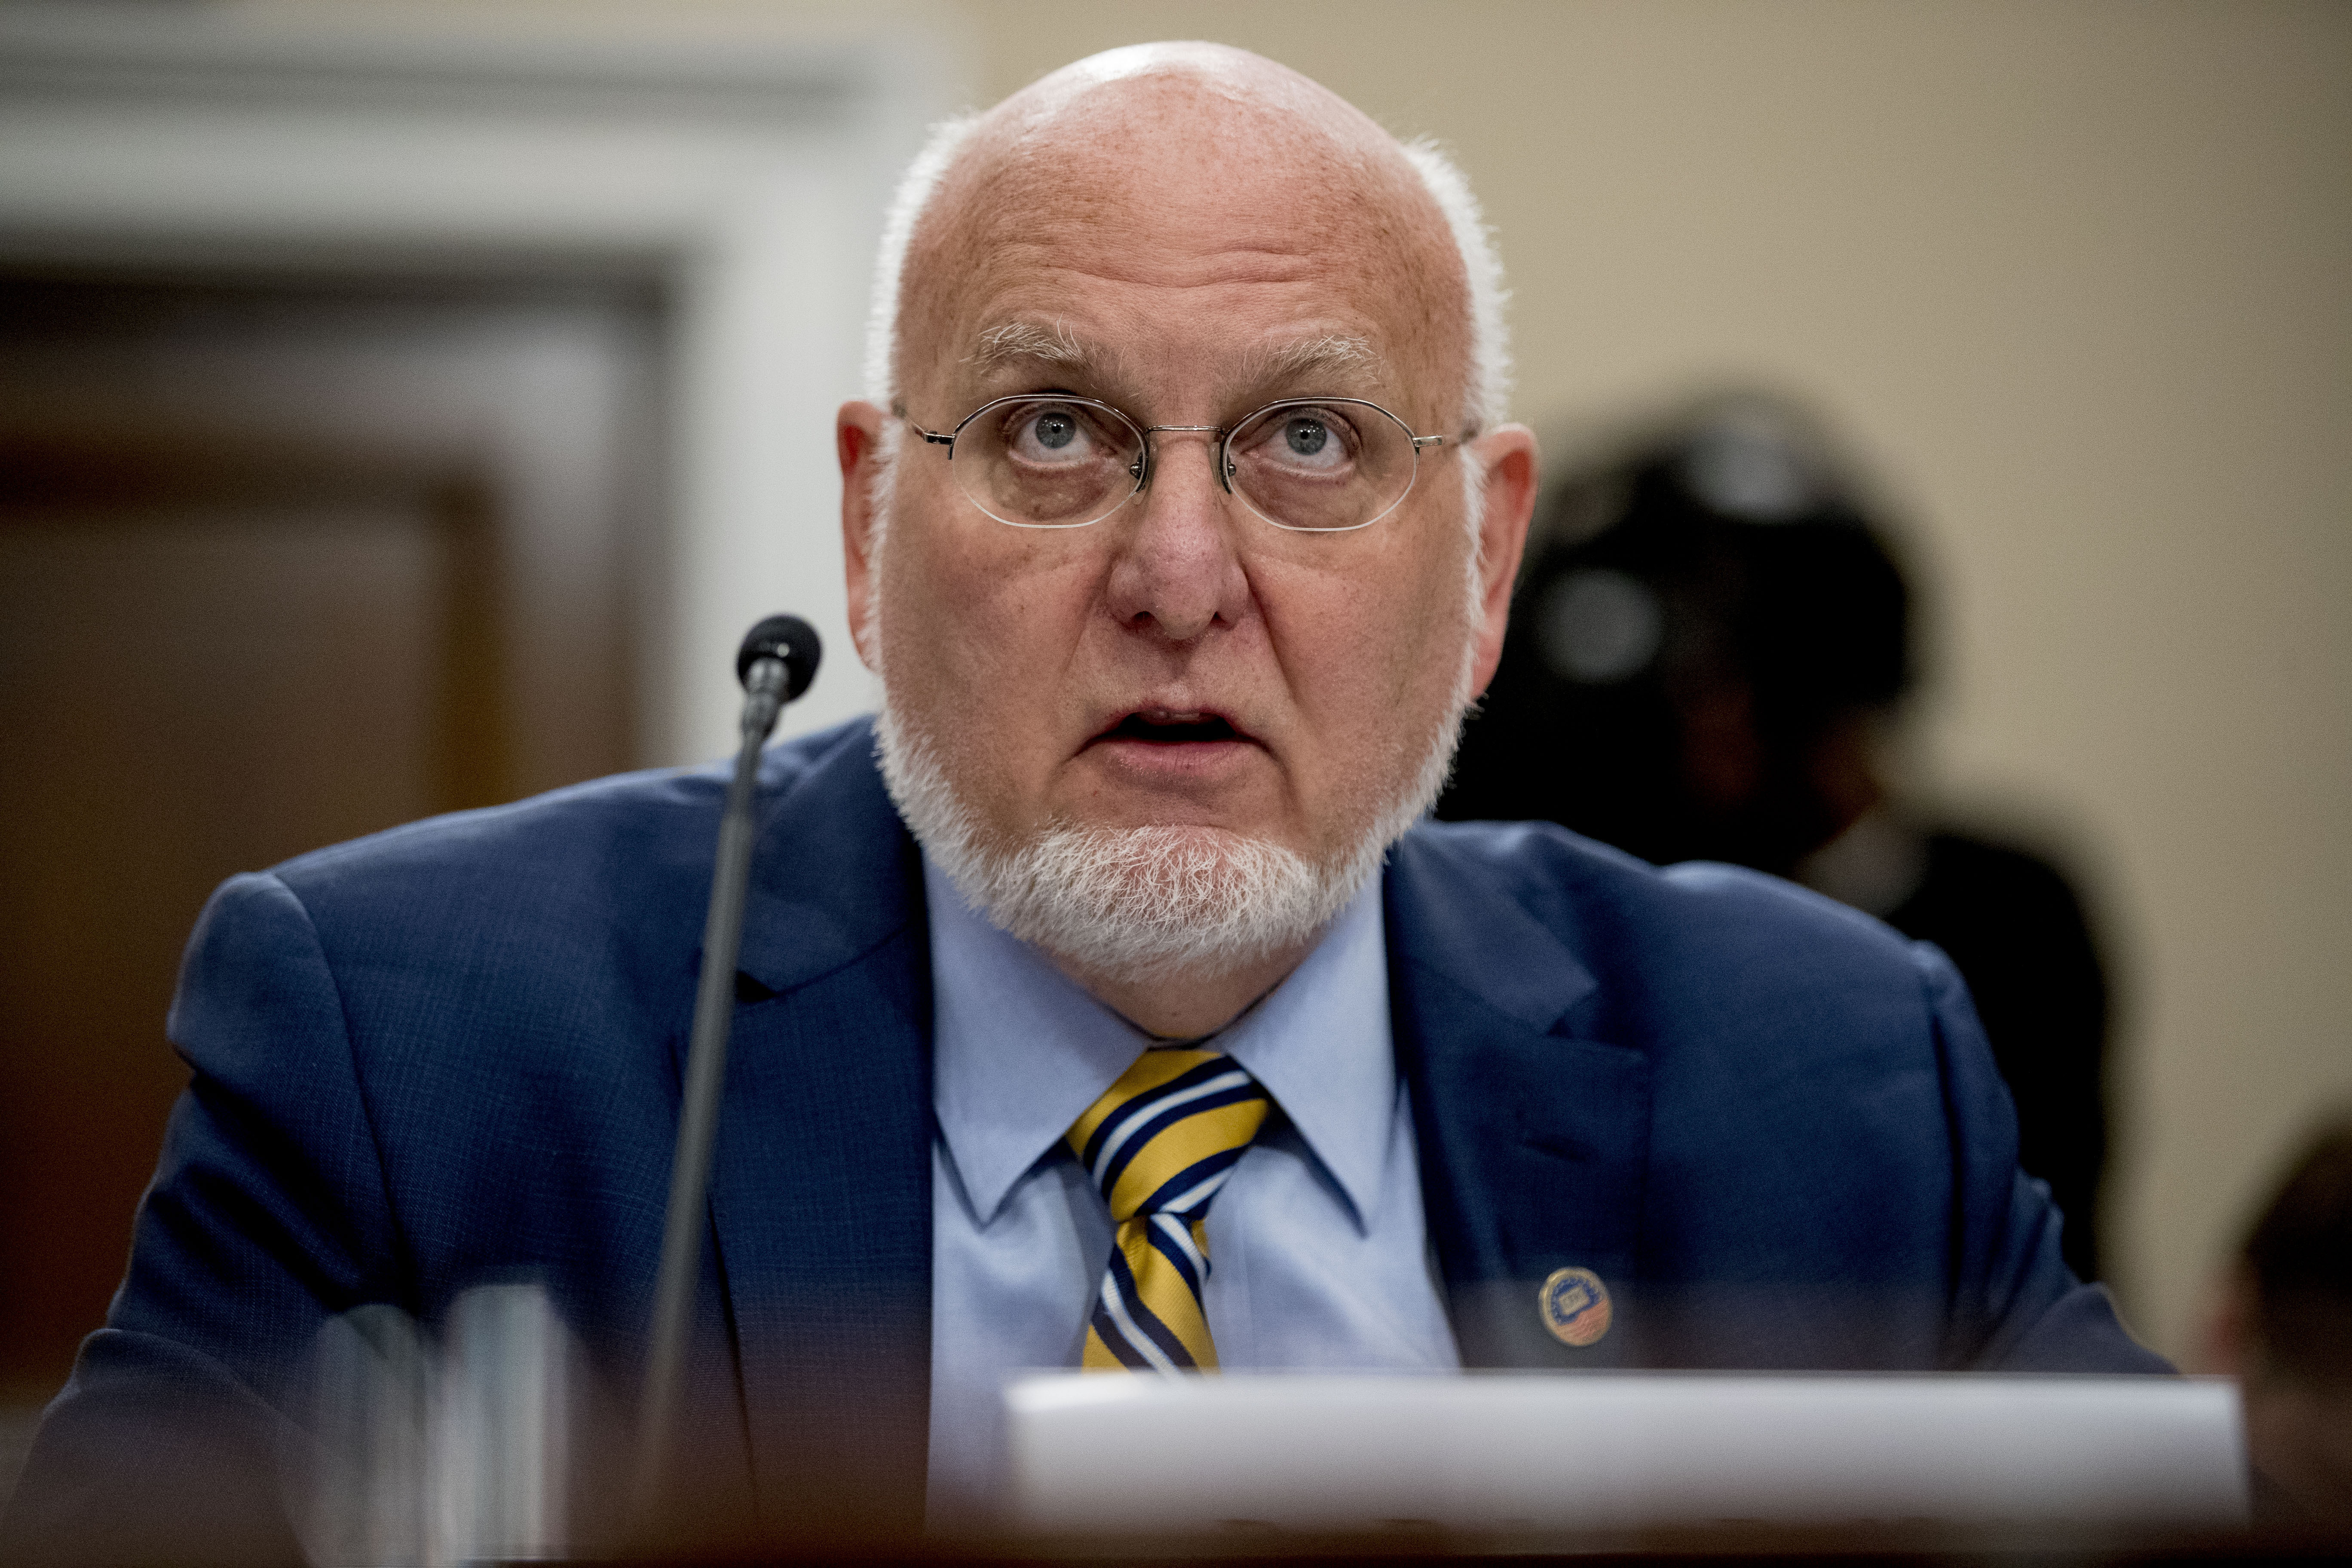 Centers for Disease Control and Prevention Director Dr. Robert Redfield testifies before a House Appropriations subcommittee hearing on the Centers for Disease Control and Prevention budget on Capitol Hill, on Tuesday, March 10.